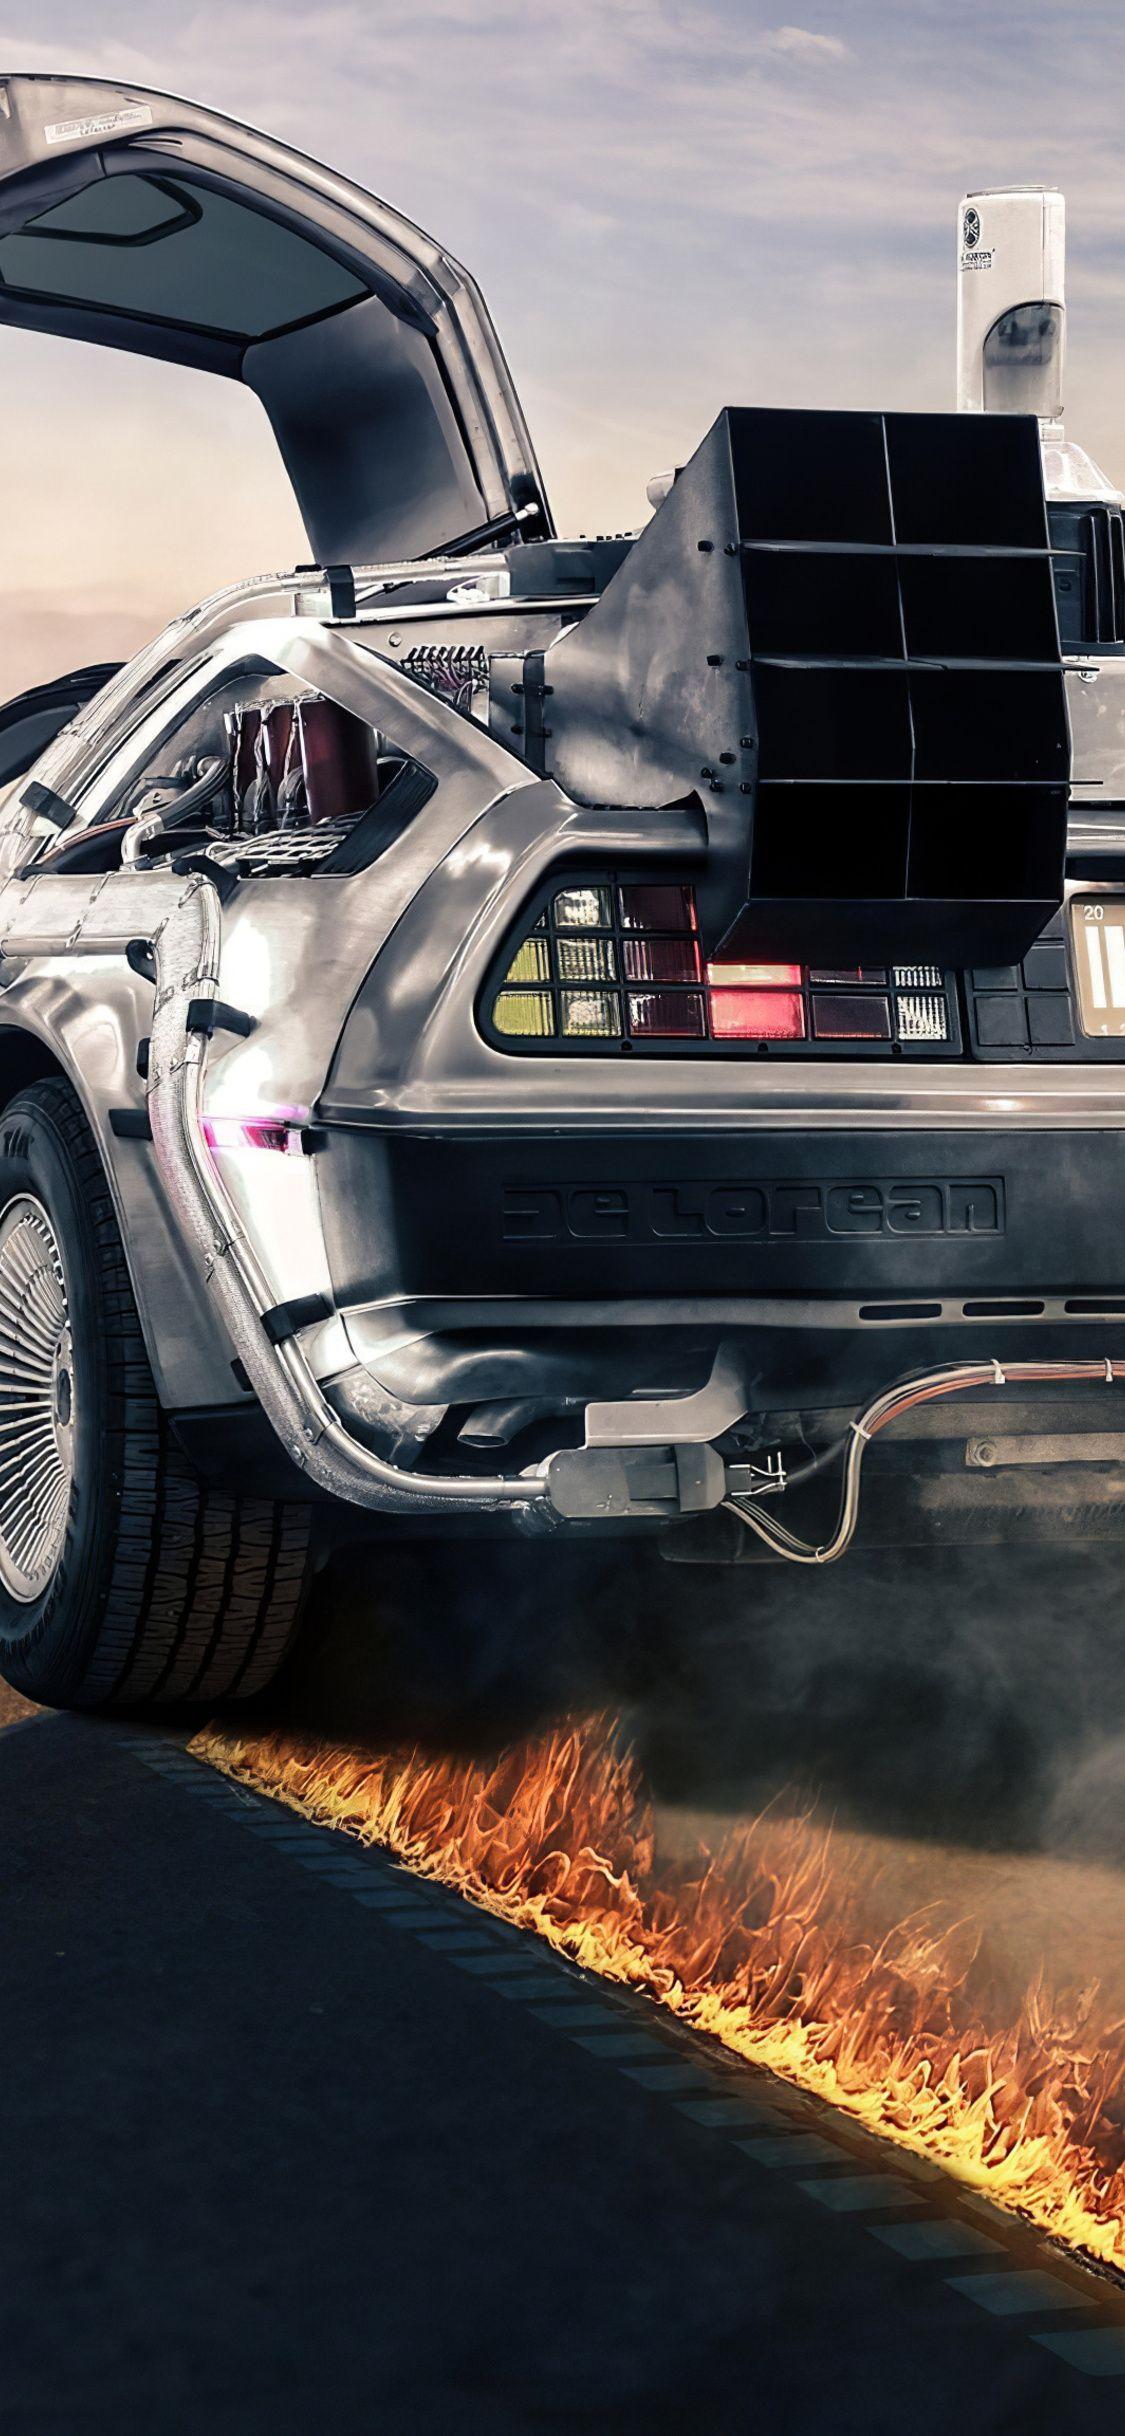 10 DeLorean HD Wallpapers and Backgrounds